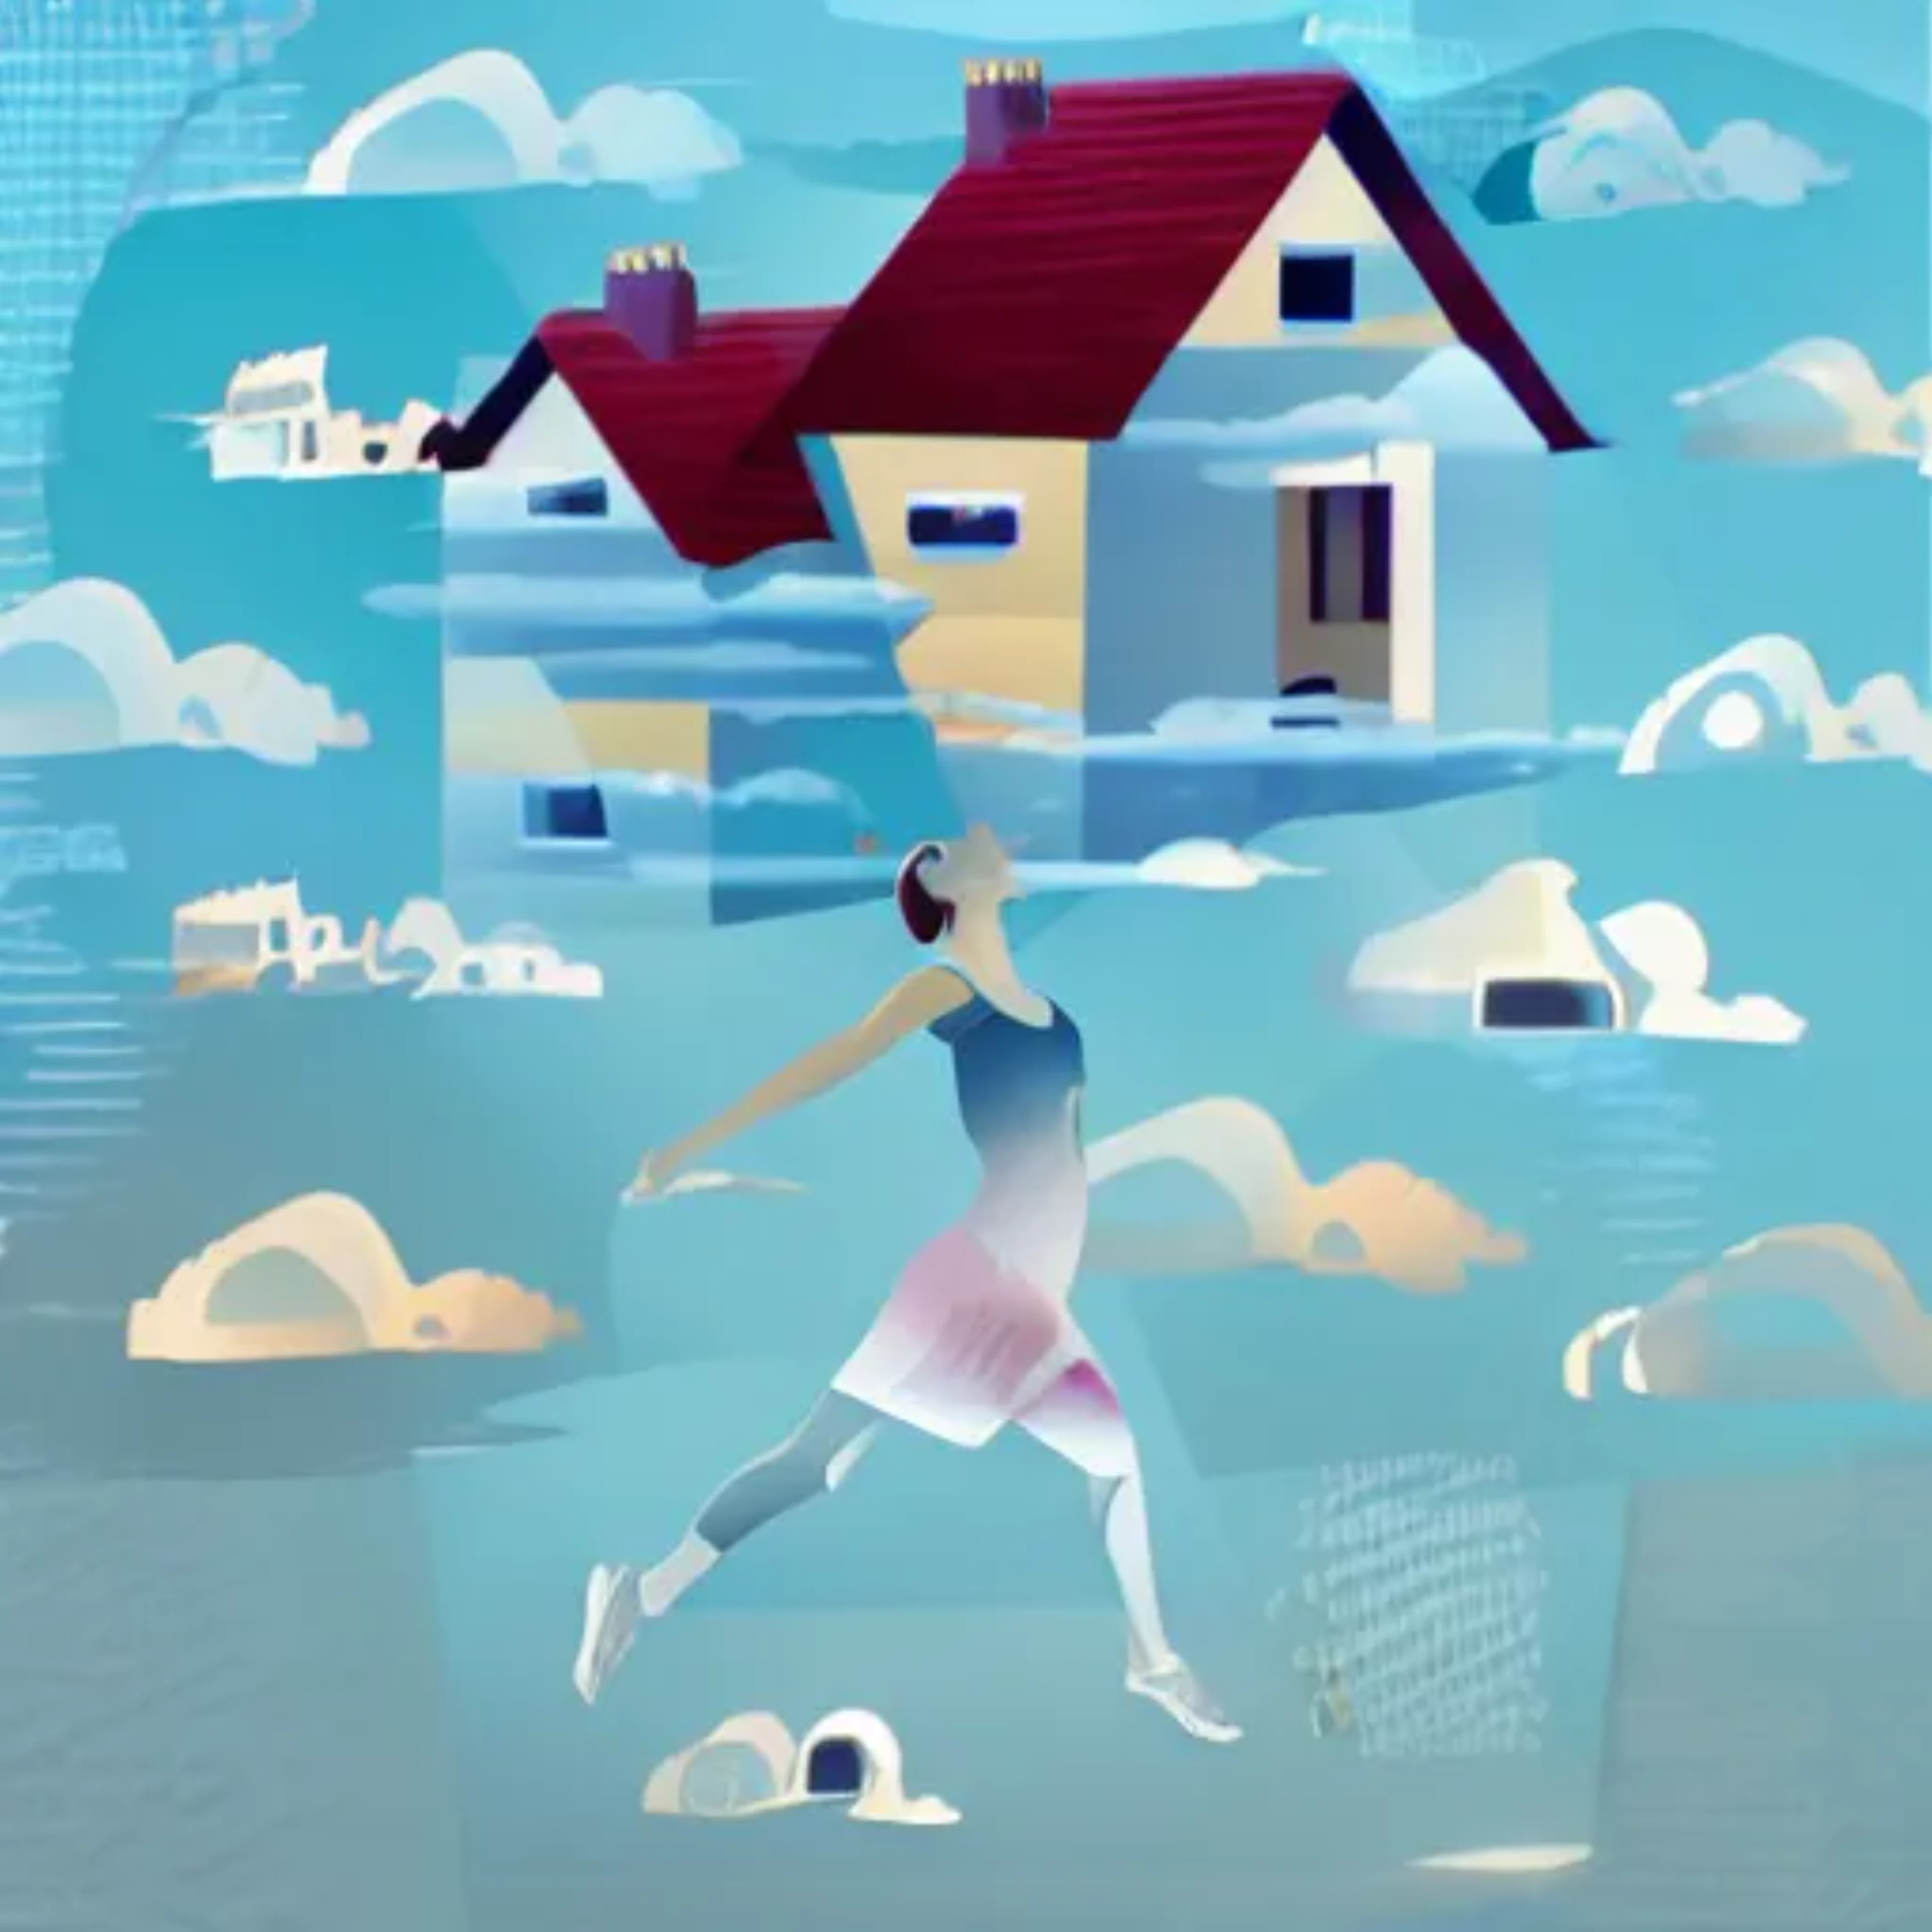 Generated abstract image of a runner and house on a blue background